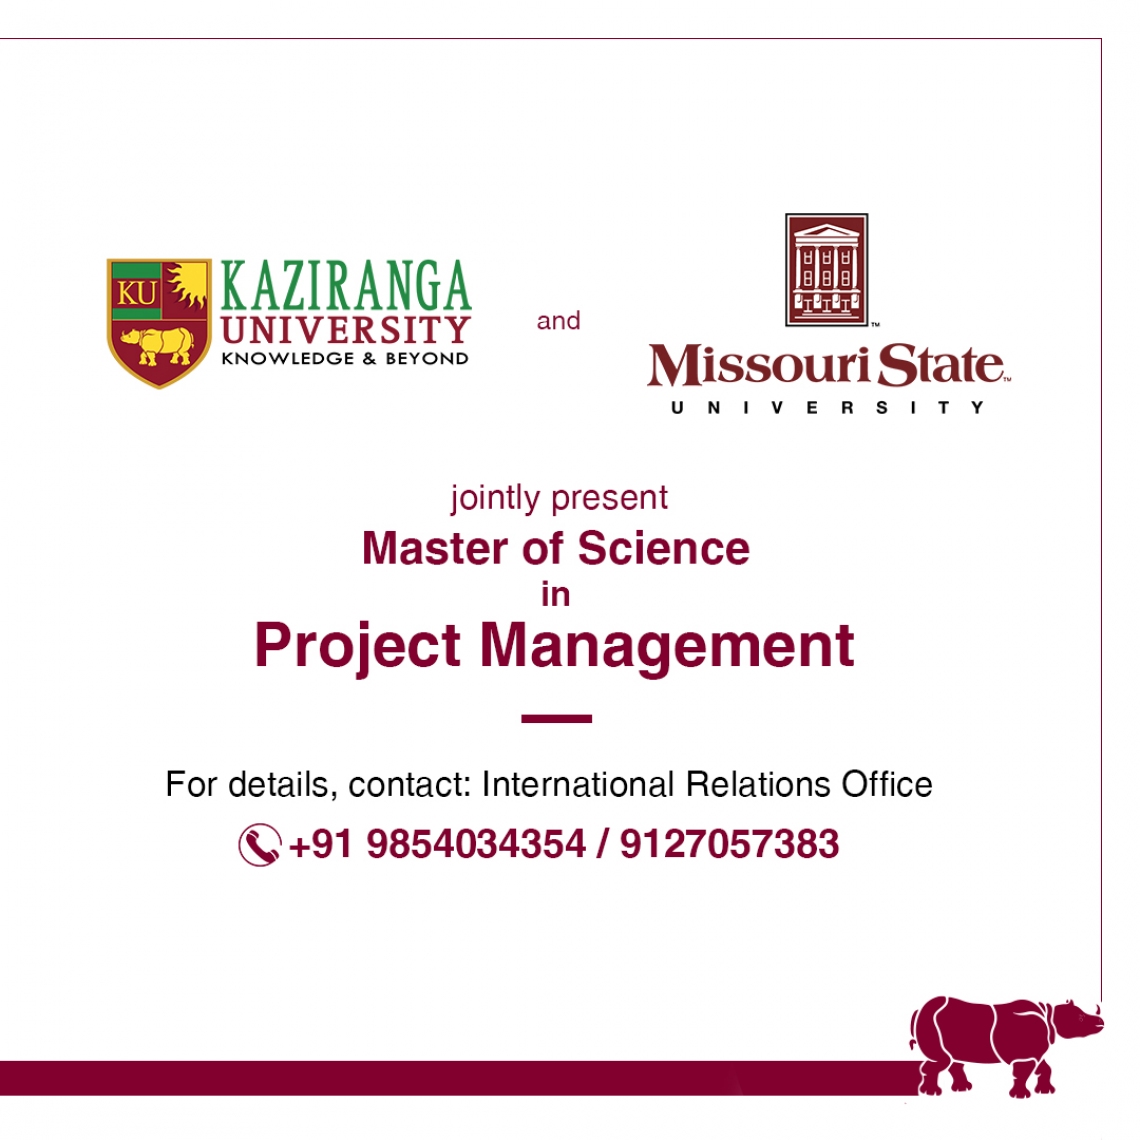 Master of Science in Project Management in collaboration with Missouri State University, USA